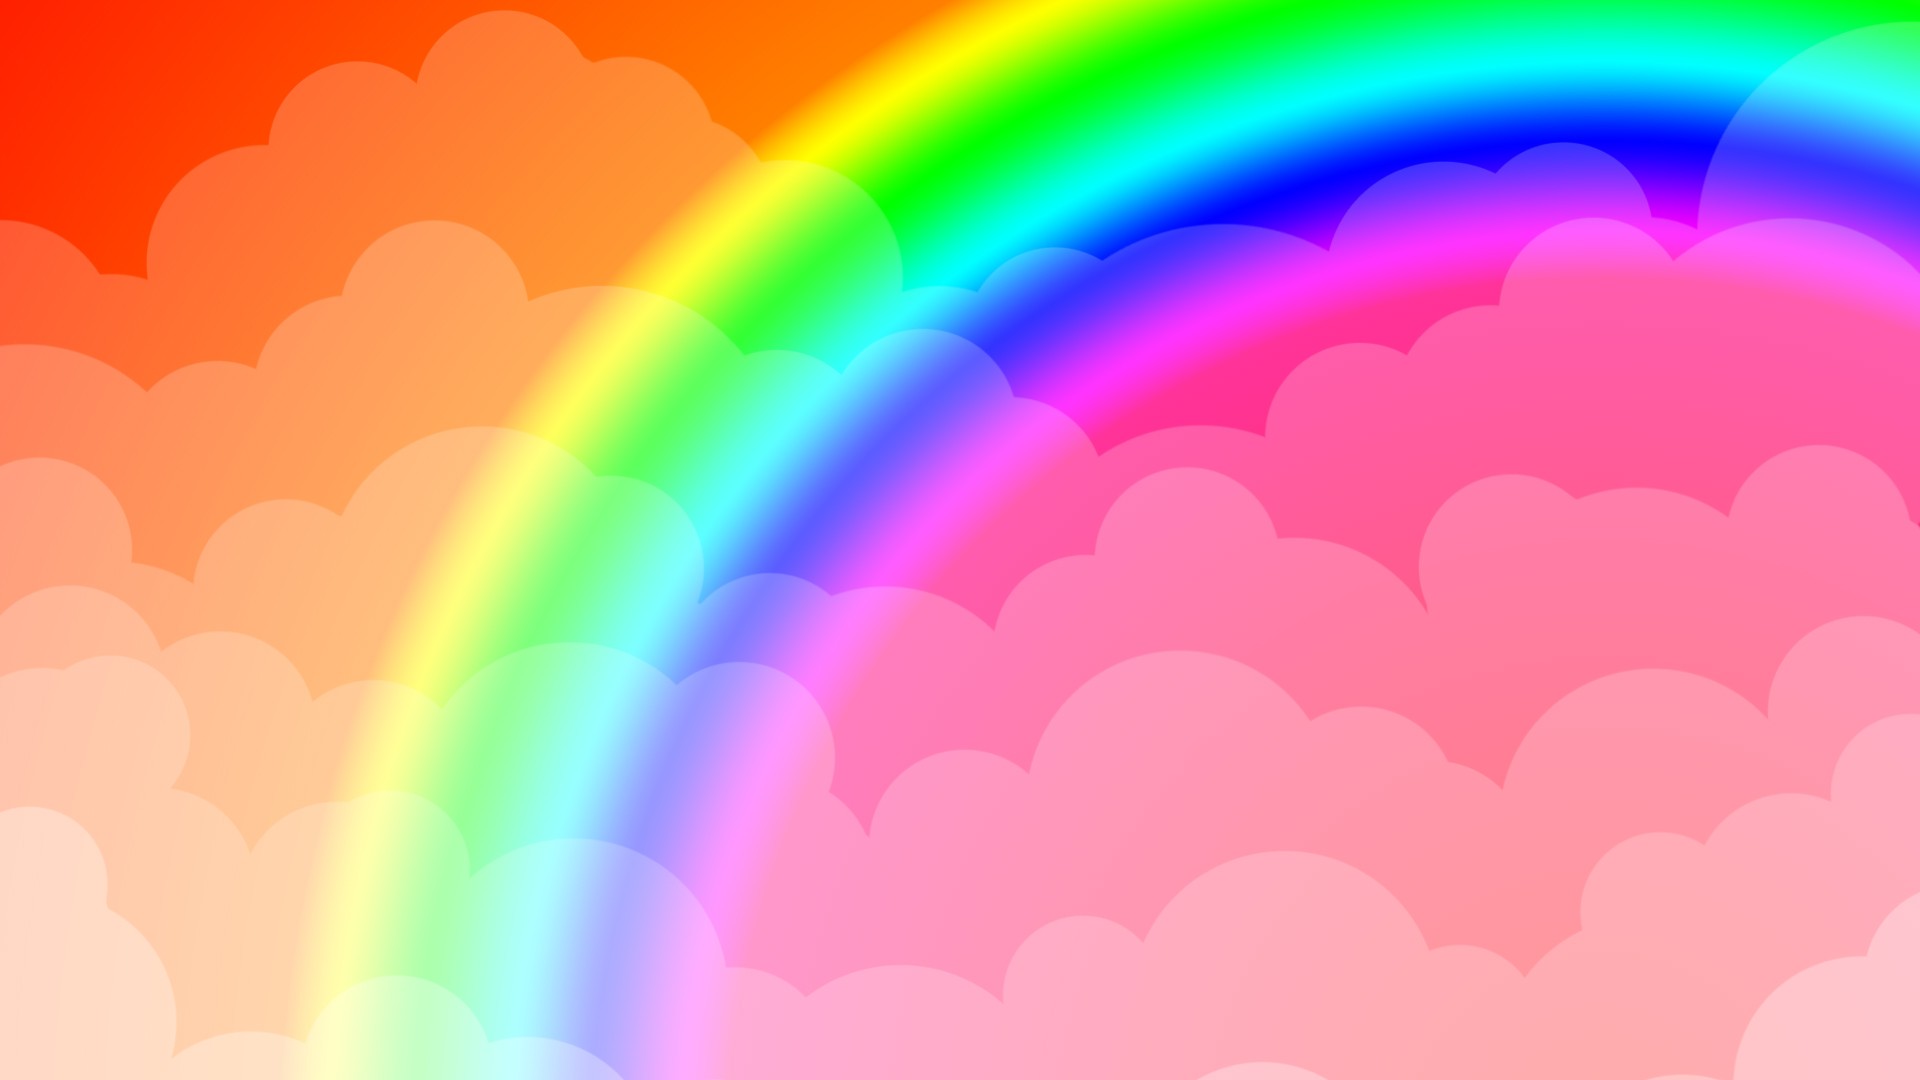 Abstract Rainbows Colorful Clouds Digital Art 1920x1080